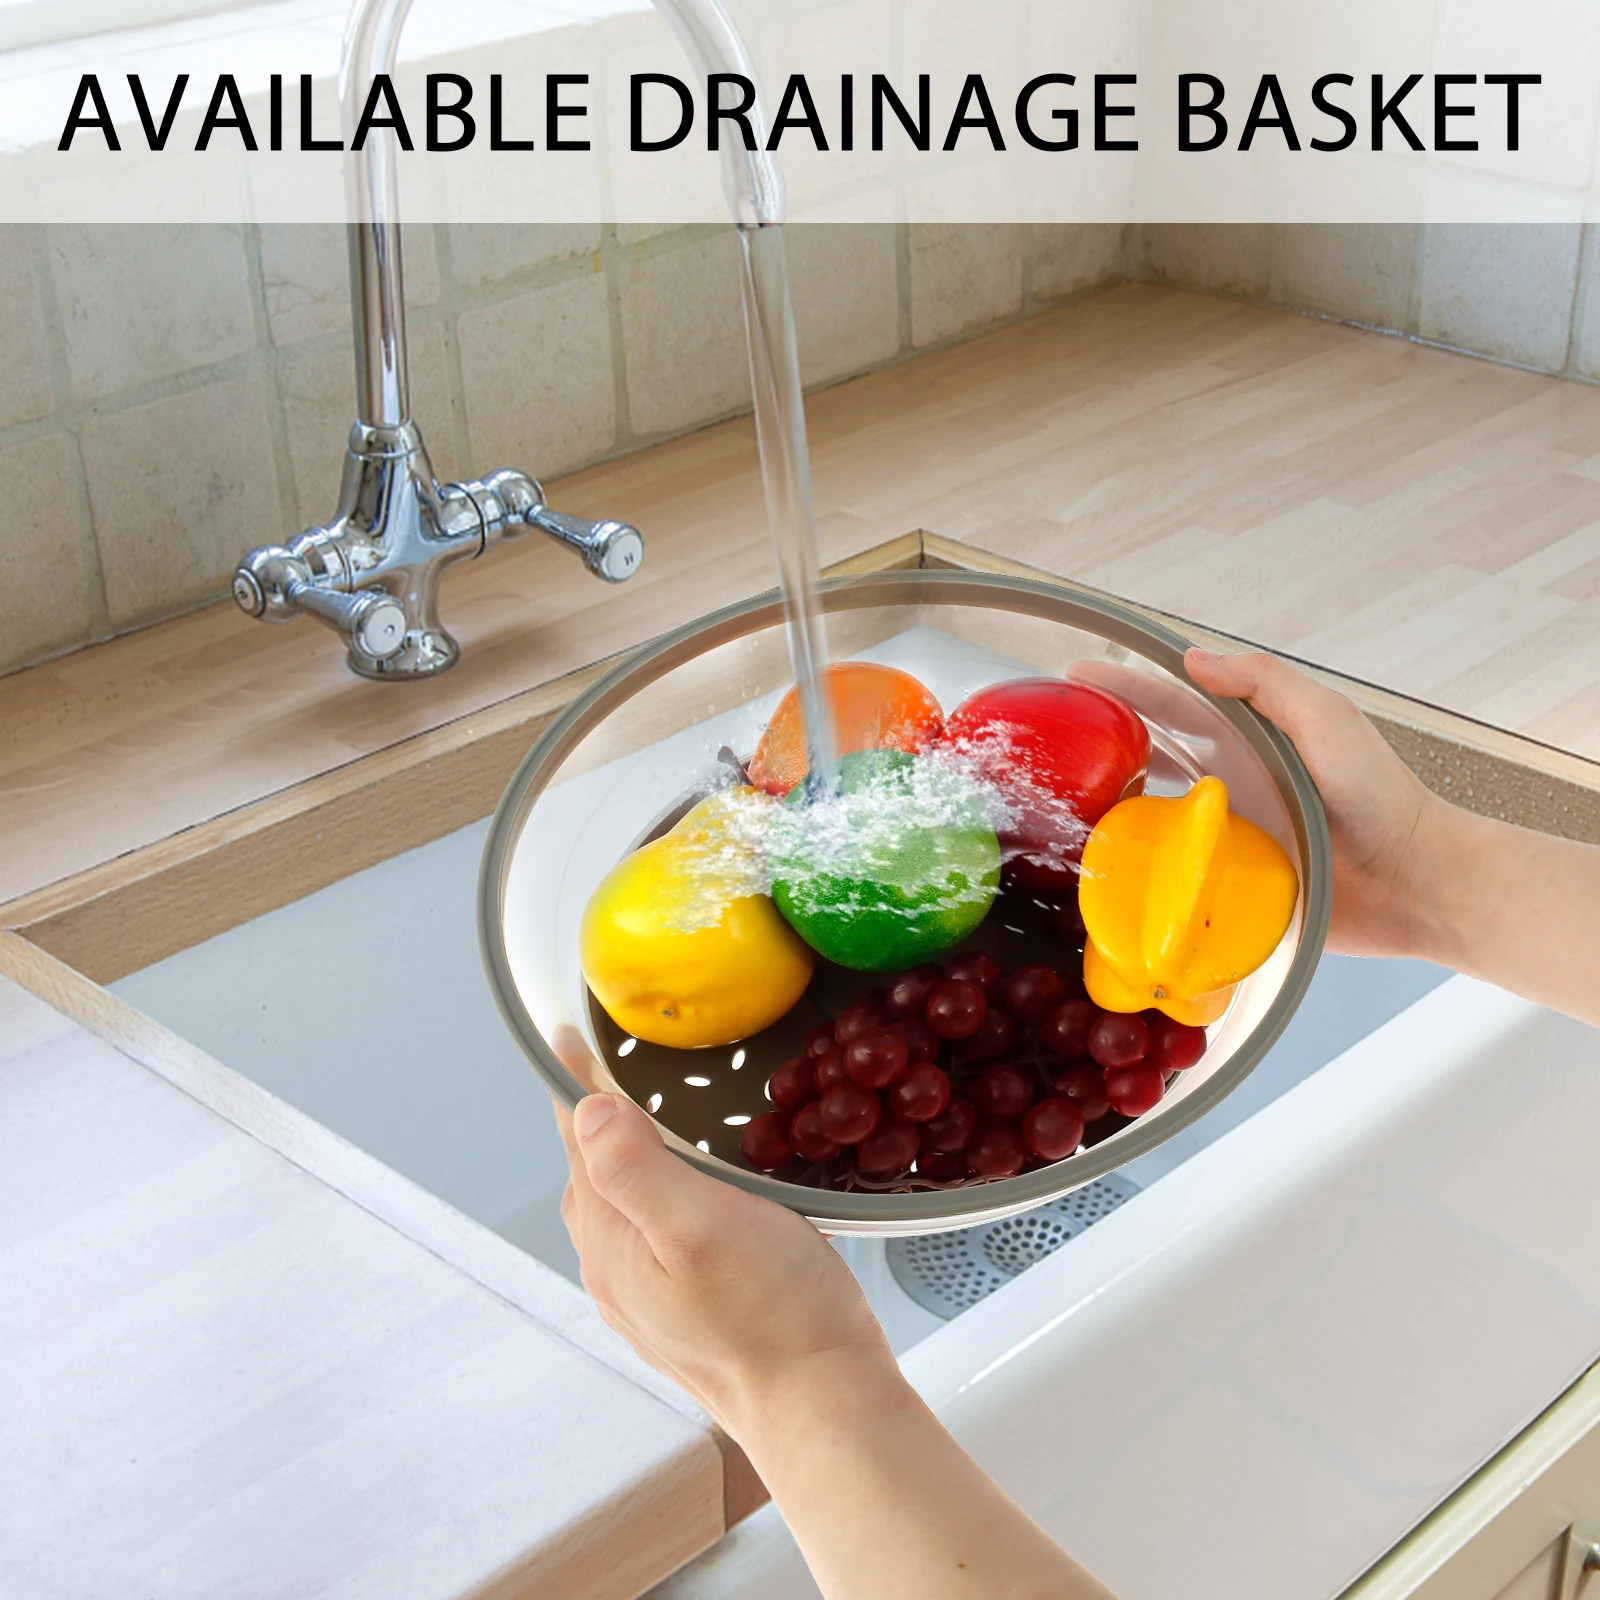 https://ae01.alicdn.com/kf/S1df0b897a5b14799801a566a60a915489/Microwave-Splatter-Cover-Microwave-Plate-Cover-with-Handle-Kitchen-Stackable-Sealing-Disk-Cover-Universal-Plate-Bowl.jpg